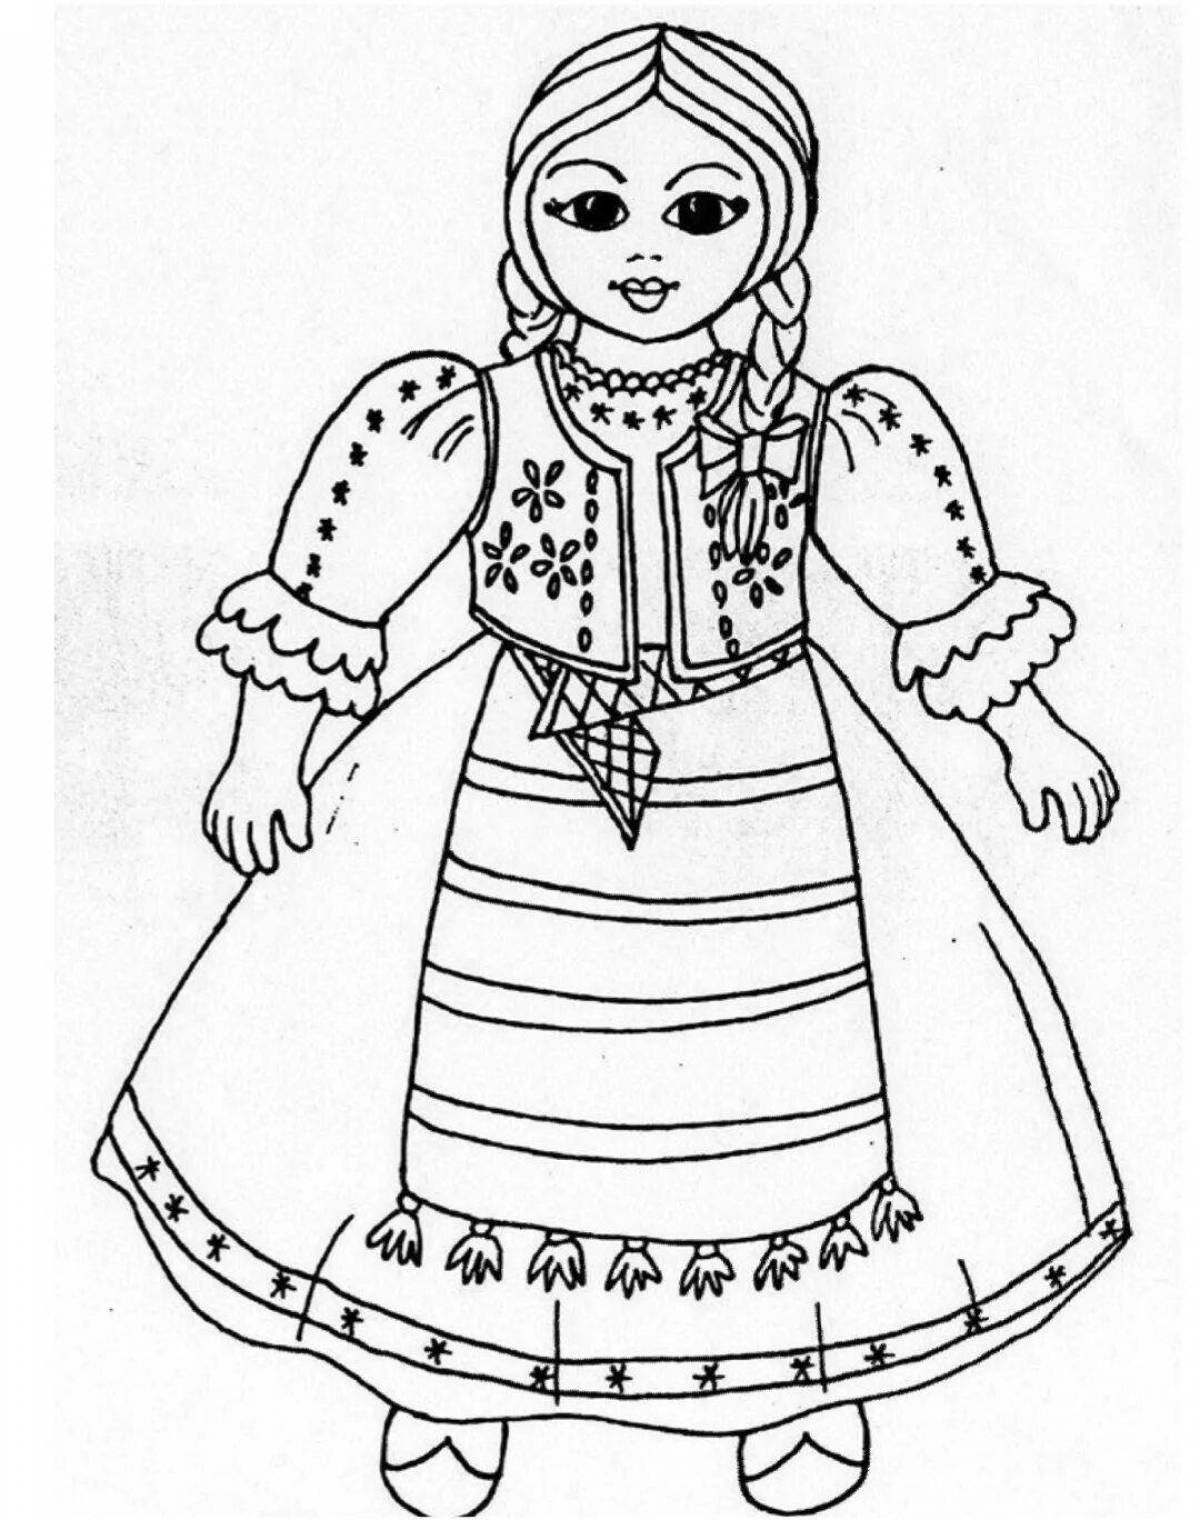 Coloring page captivating Belarusian national costume